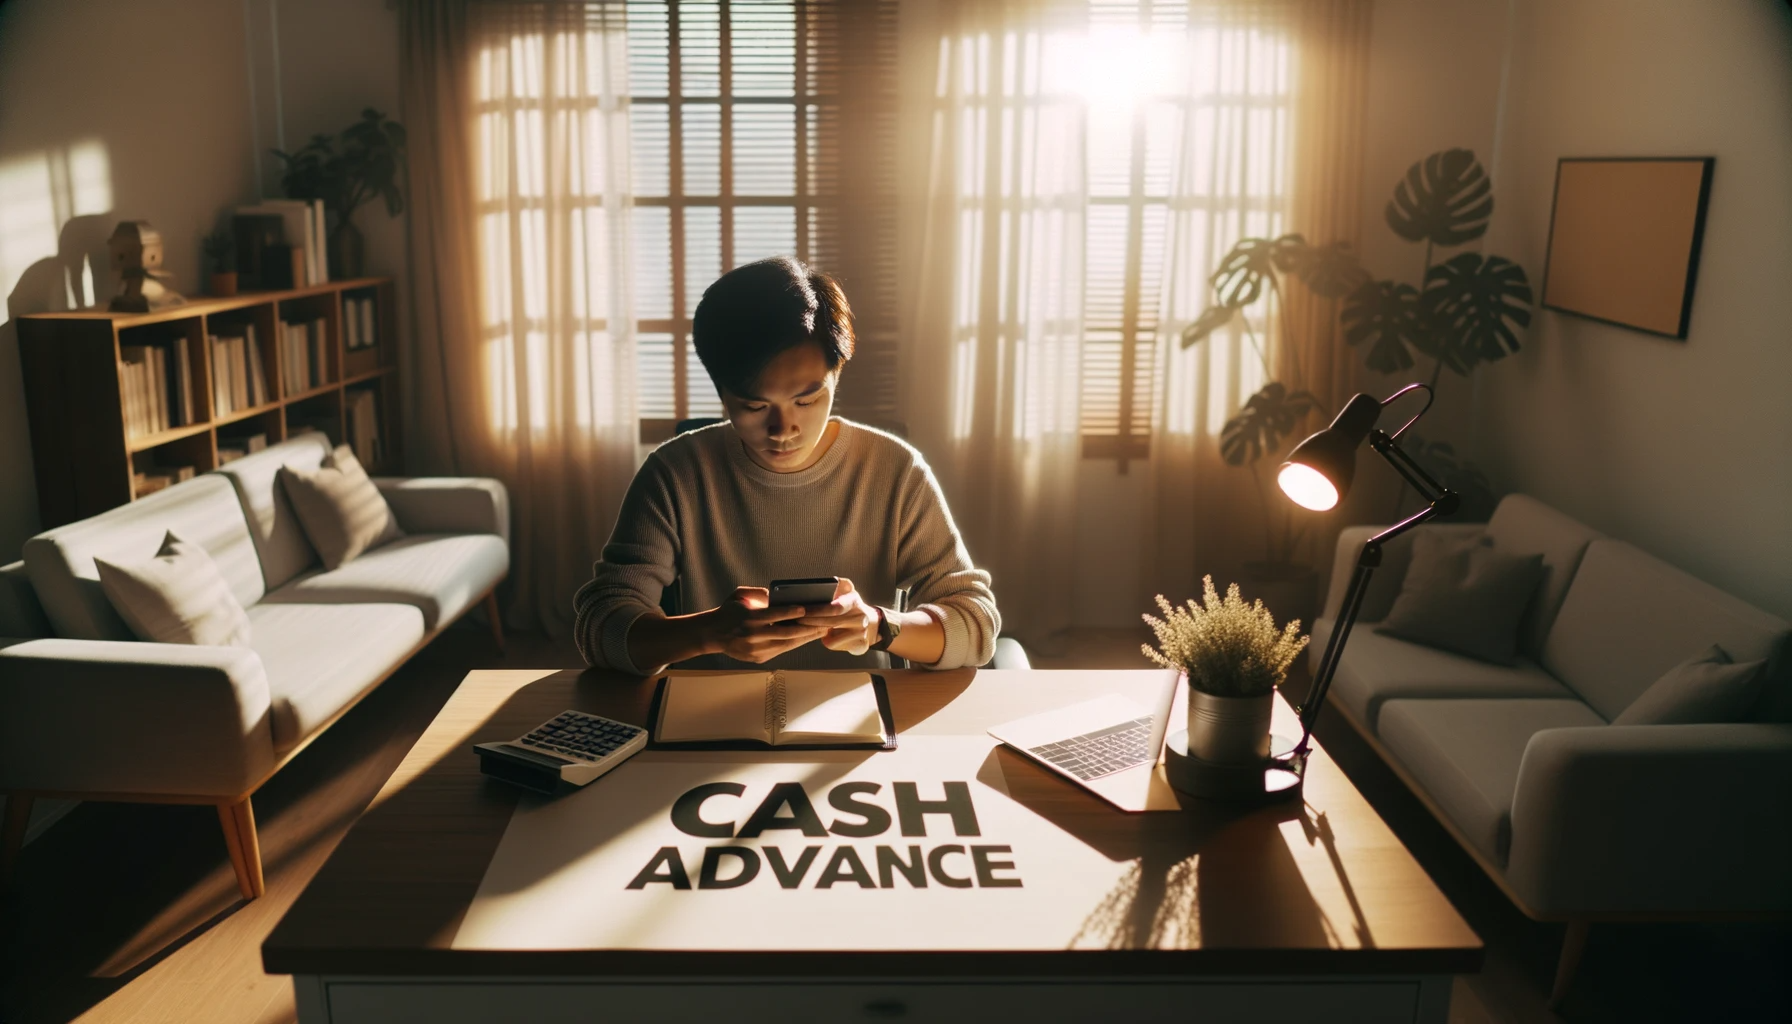 A person using a cash advance app to compare fees and interest rates